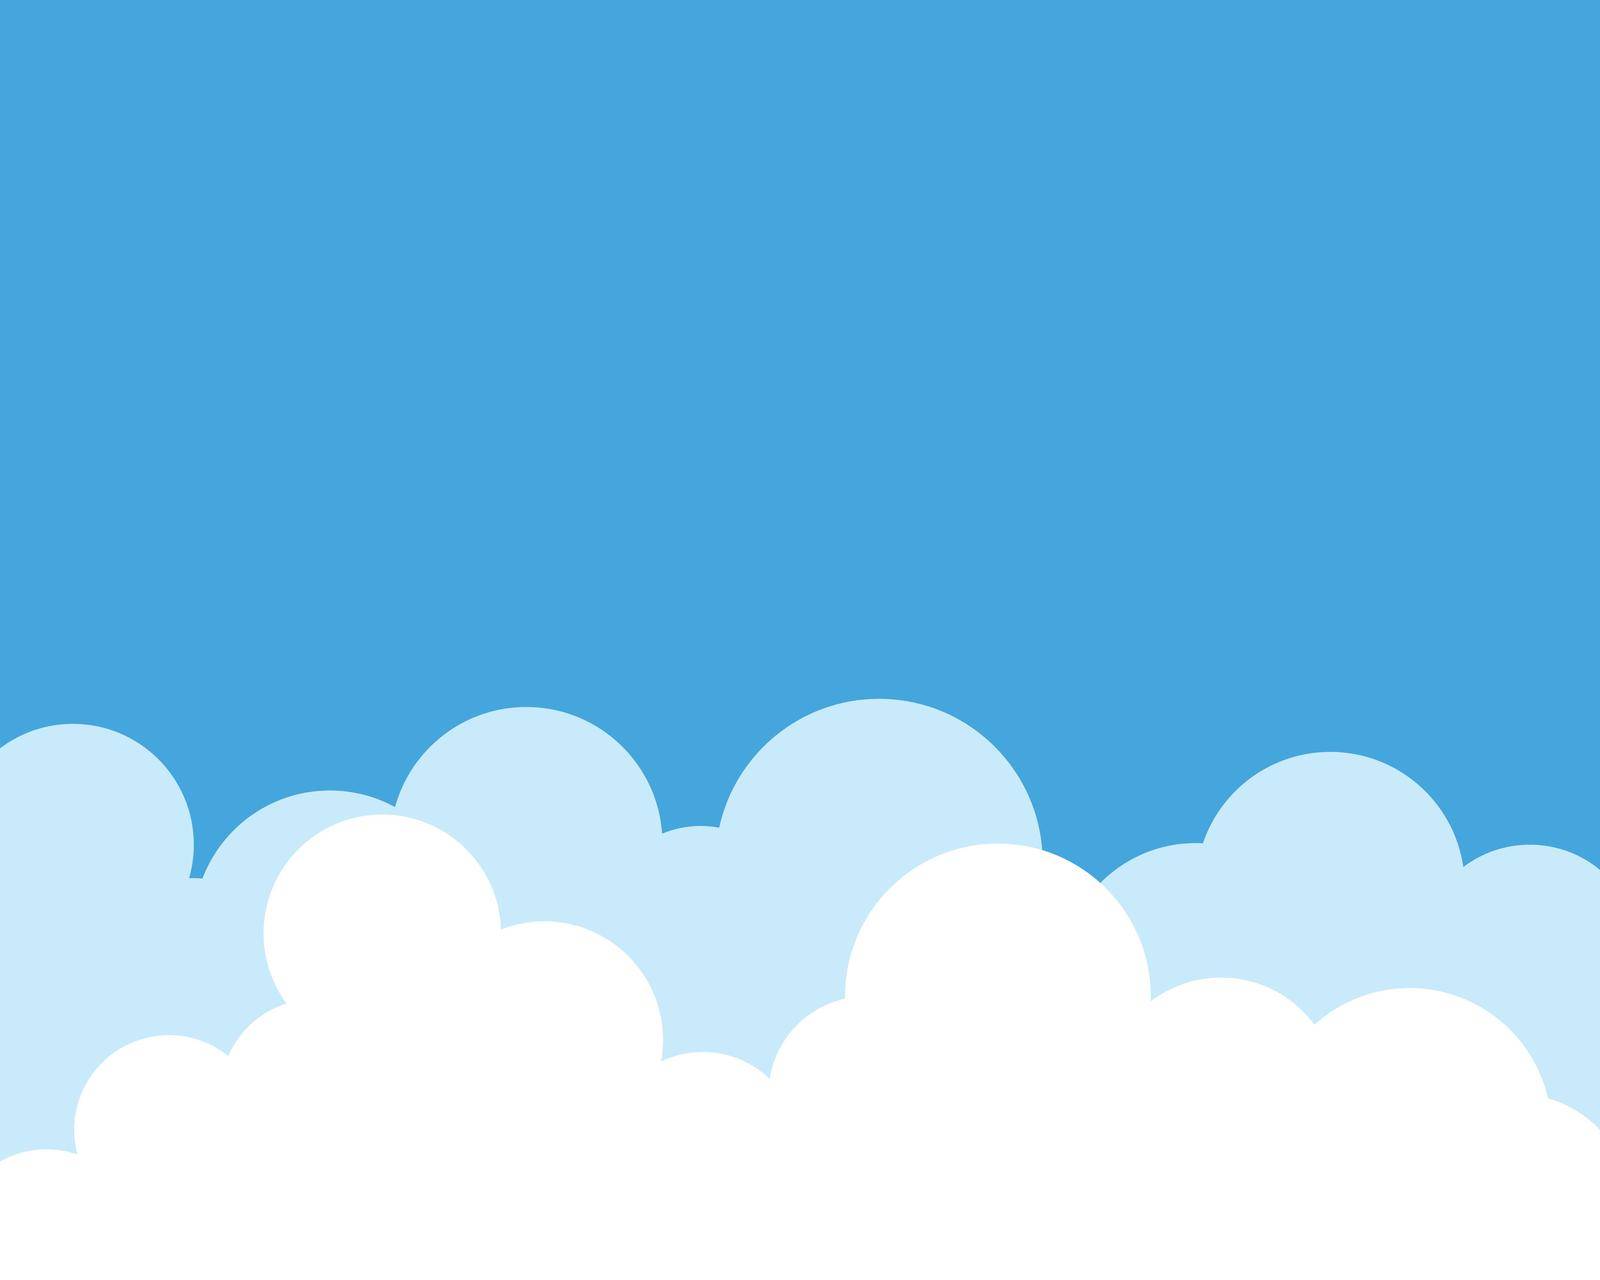 Blue sky with cloud icon illustration by ichadsgn